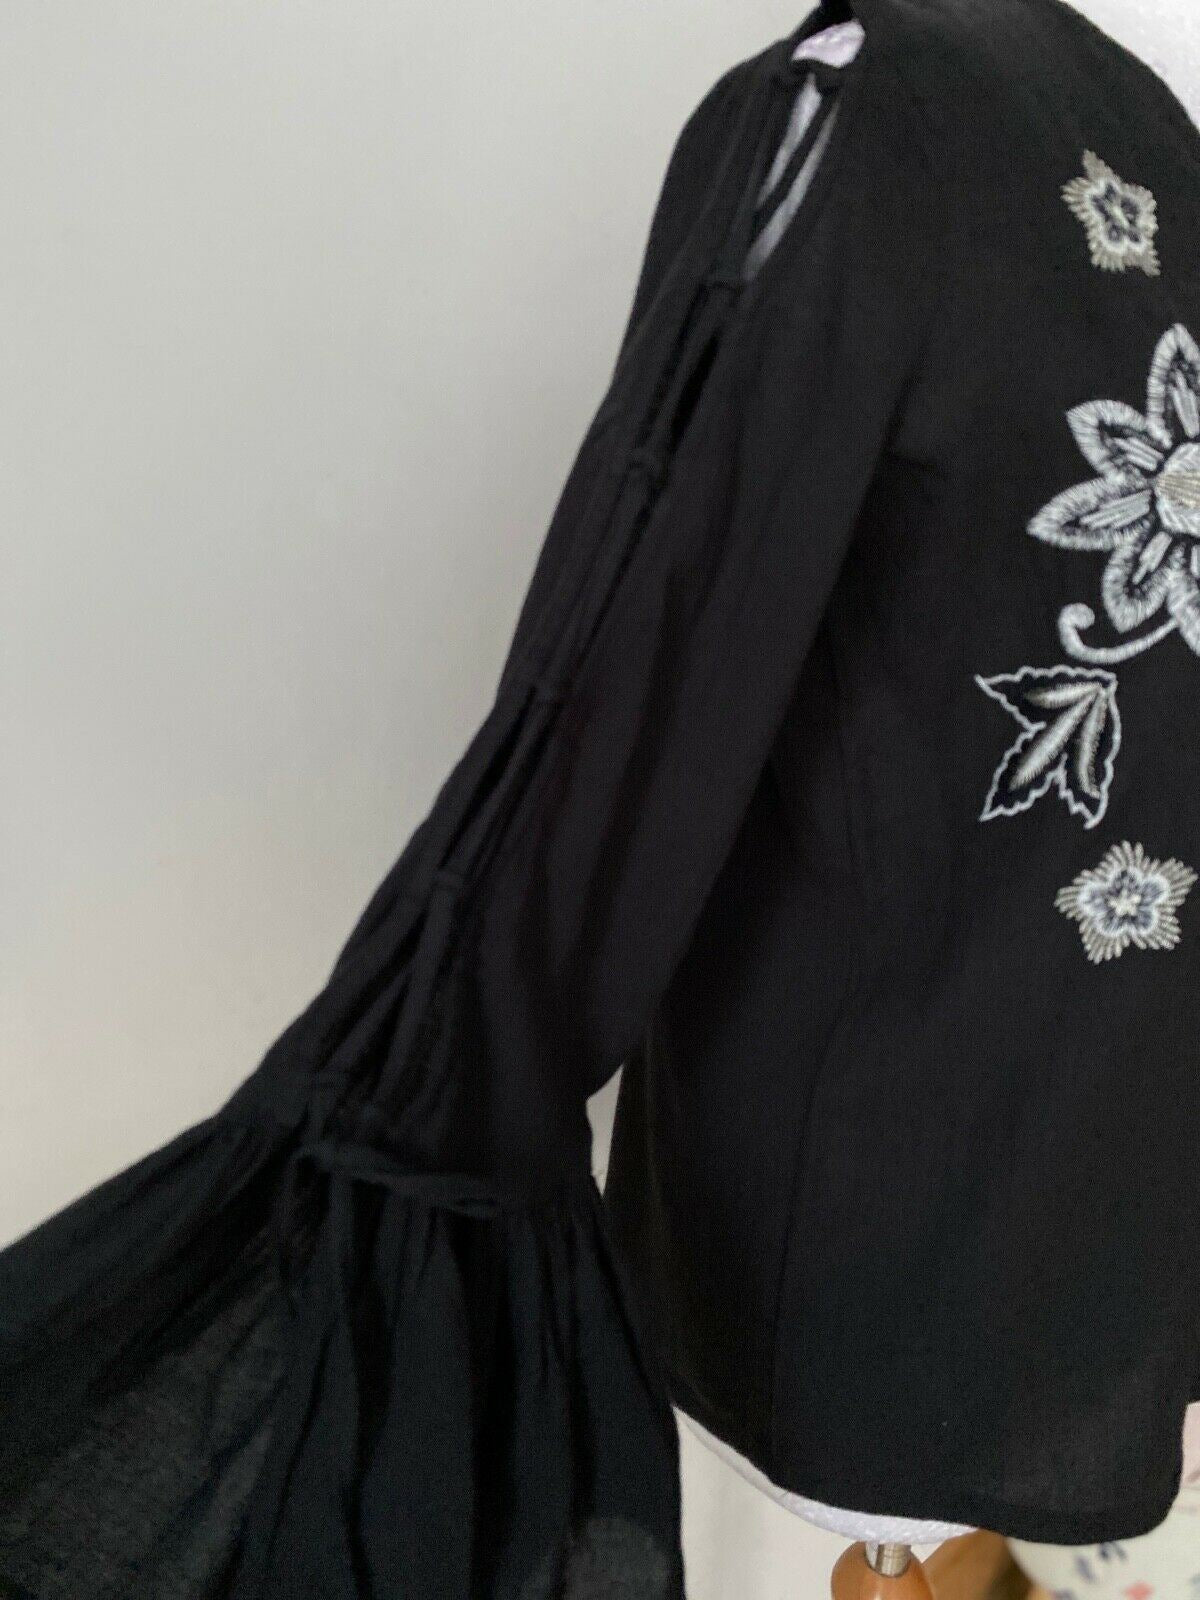 River Island Black Blouse Lace Tie Sleeves Embroidered Size 8